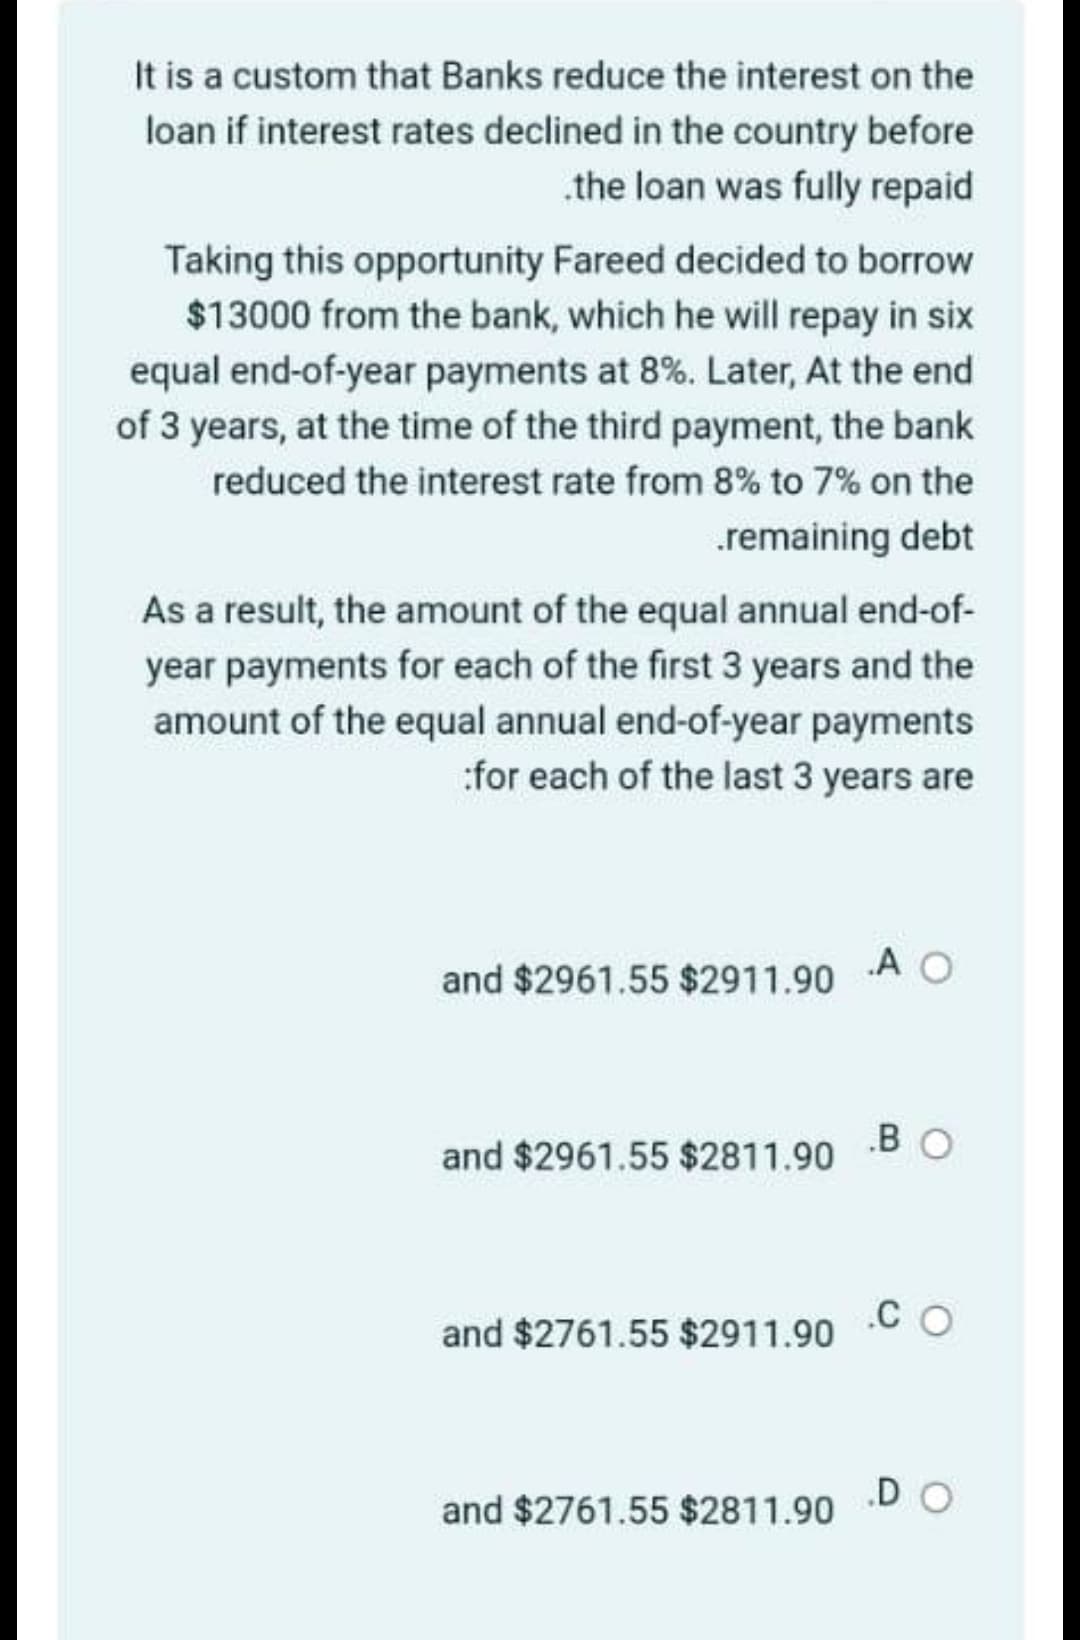 It is a custom that Banks reduce the interest on the
loan if interest rates declined in the country before
.the loan was fully repaid
Taking this opportunity Fareed decided to borrow
$13000 from the bank, which he will repay in six
equal end-of-year payments at 8%. Later, At the end
of 3 years, at the time of the third payment, the bank
reduced the interest rate from 8% to 7% on the
.remaining debt
As a result, the amount of the equal annual end-of-
year payments for each of the first 3 years and the
amount of the equal annual end-of-year payments
:for each of the last 3 years are
and $2961.55 $2911.90
A O
and $2961.55 $2811.90
.B O
.C O
and $2761.55 $2911.90
.D O
and $2761.55 $2811.90
